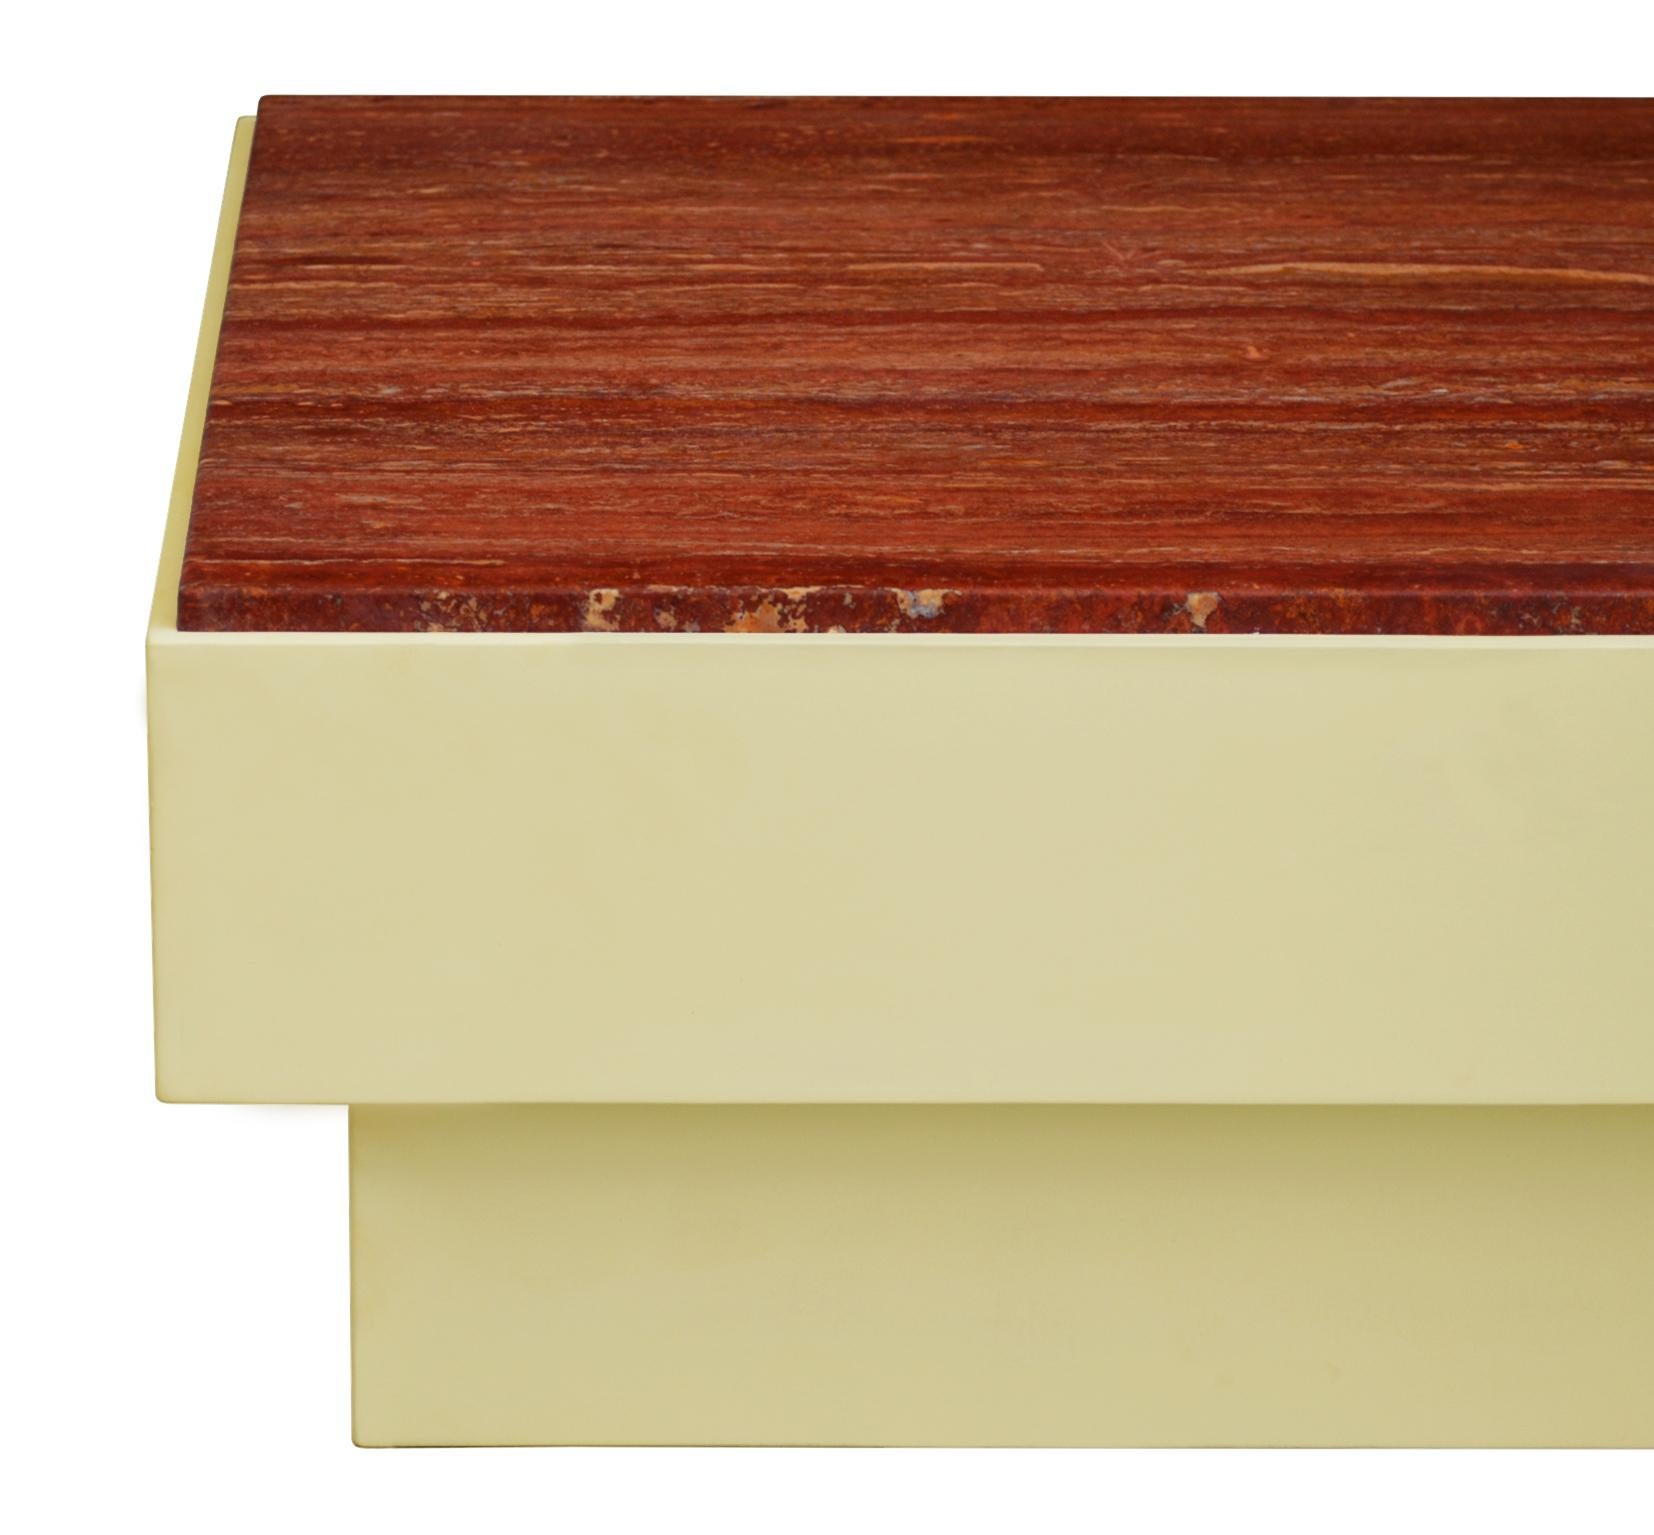 Italian Coffee table red travertine and ivory wooden base handmade in Italy by Cupioli For Sale